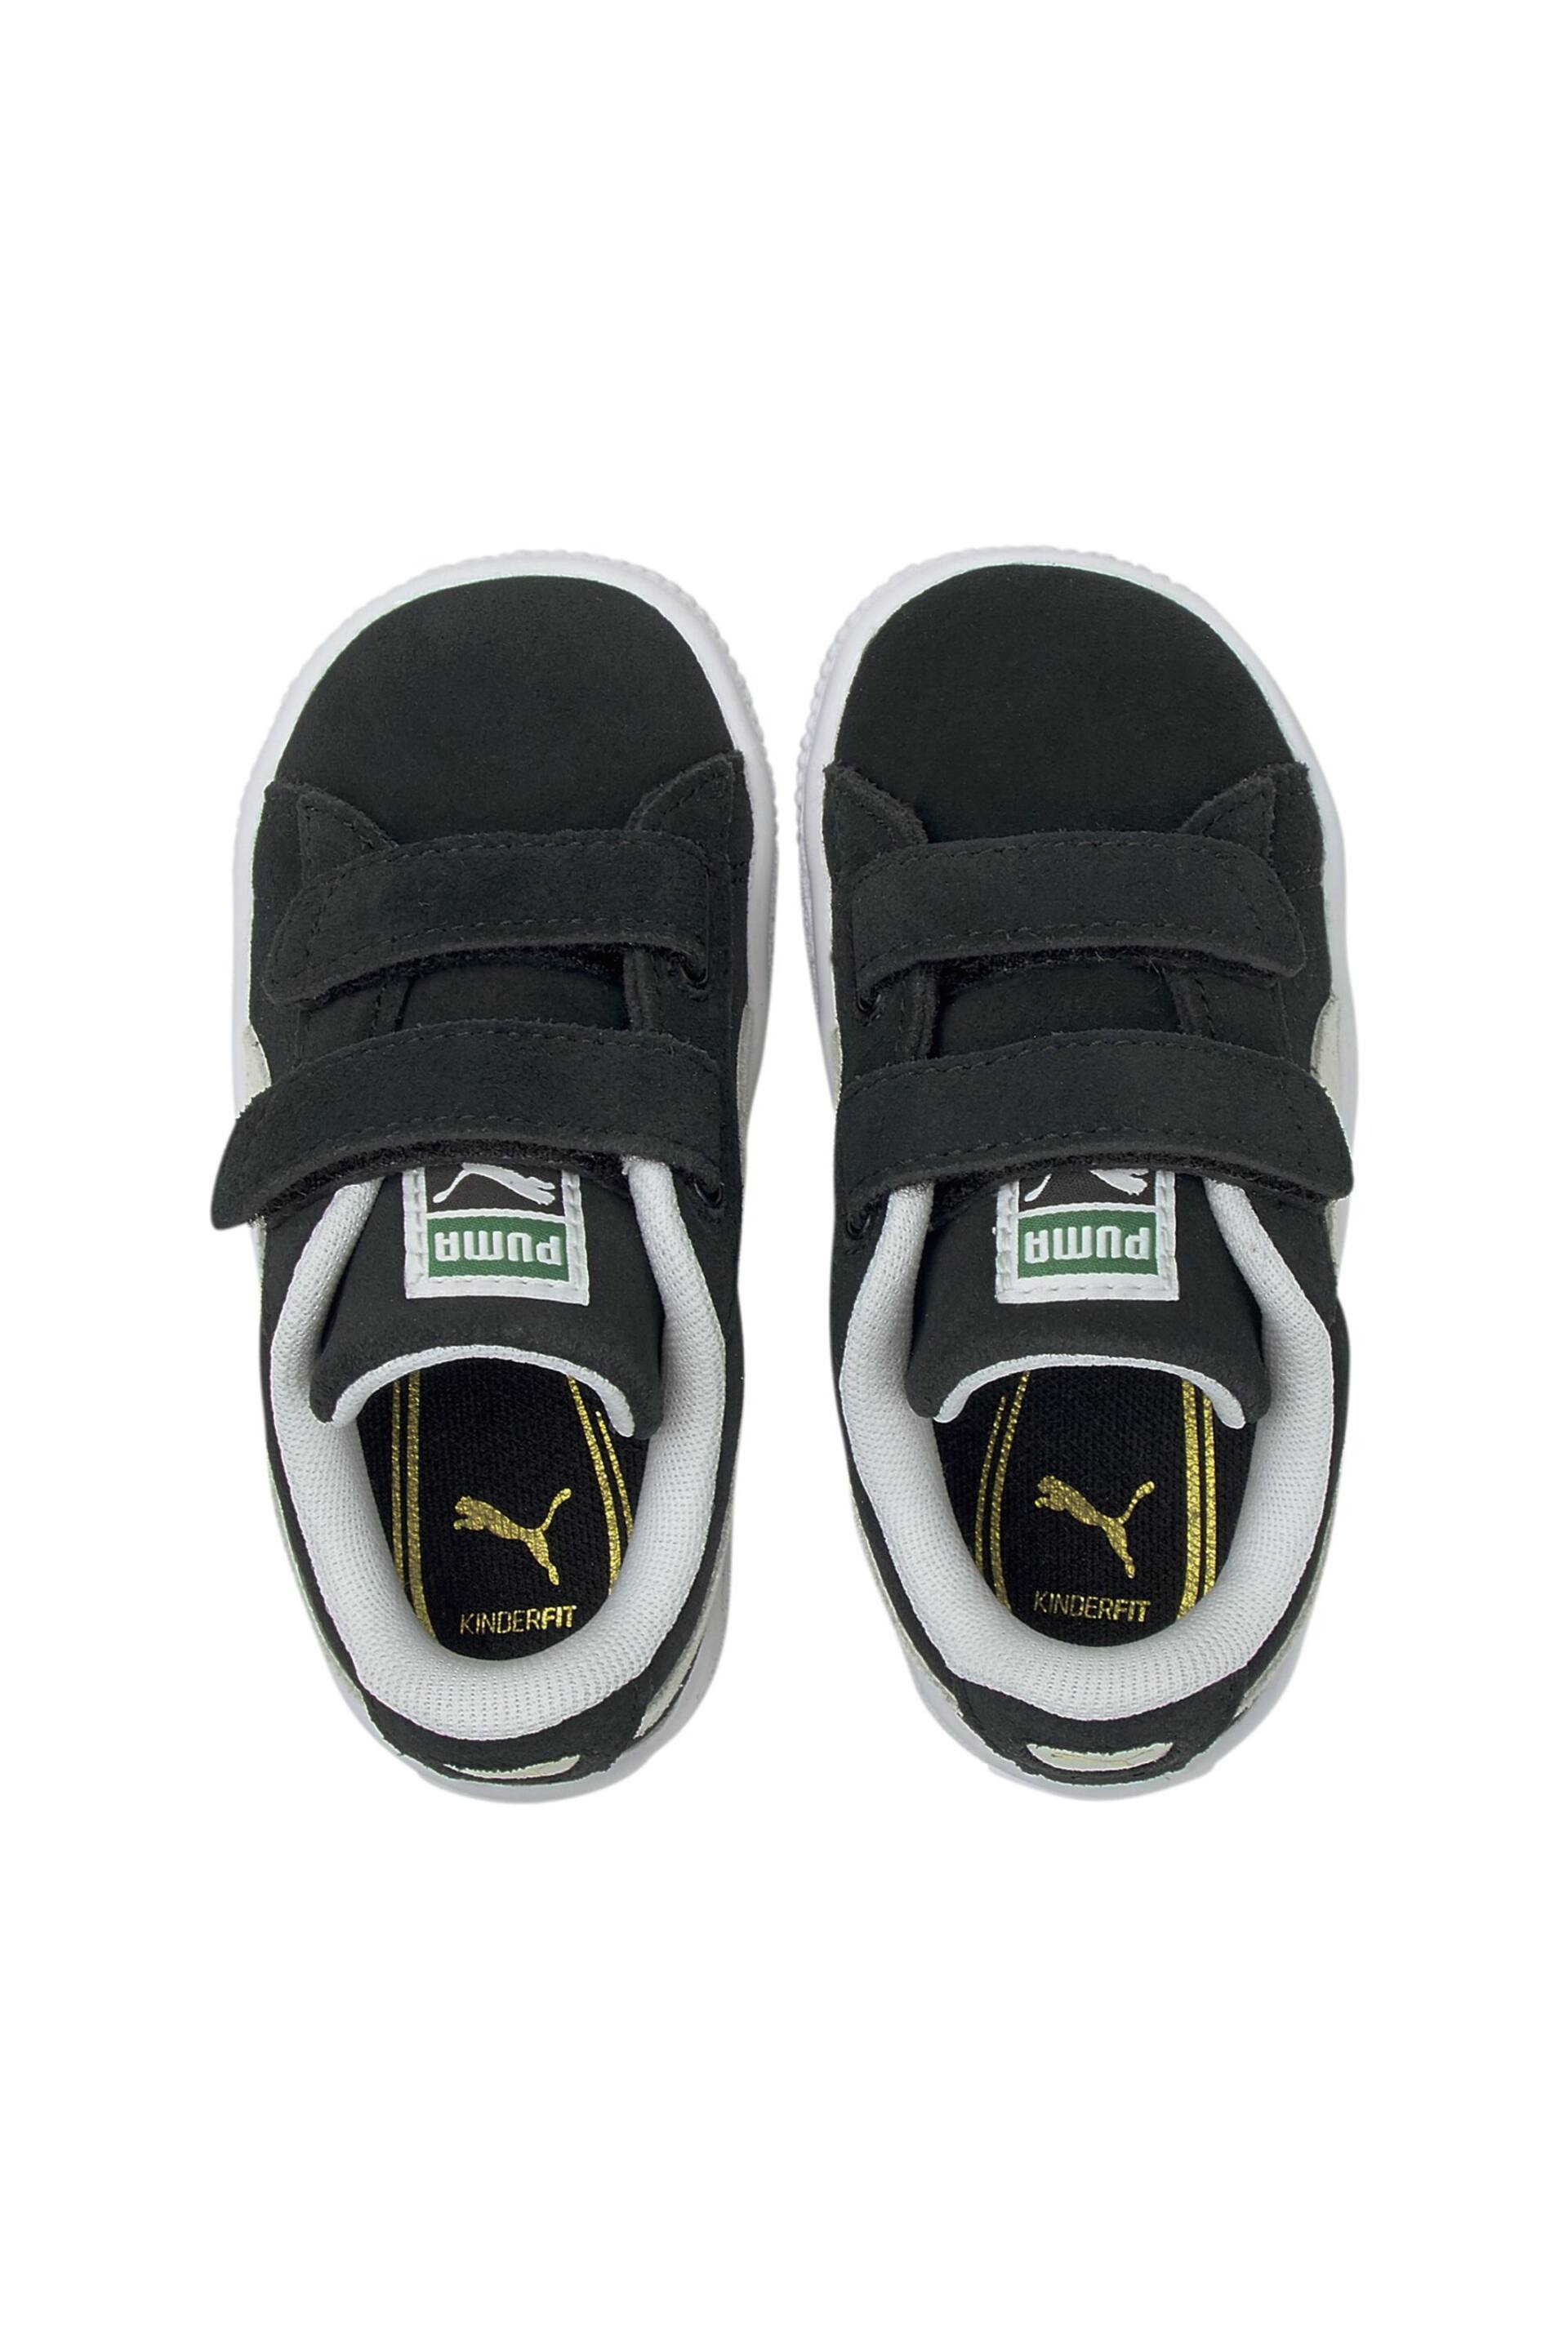 Puma Black Babies Suede Classic XXI Trainers - Image 7 of 11